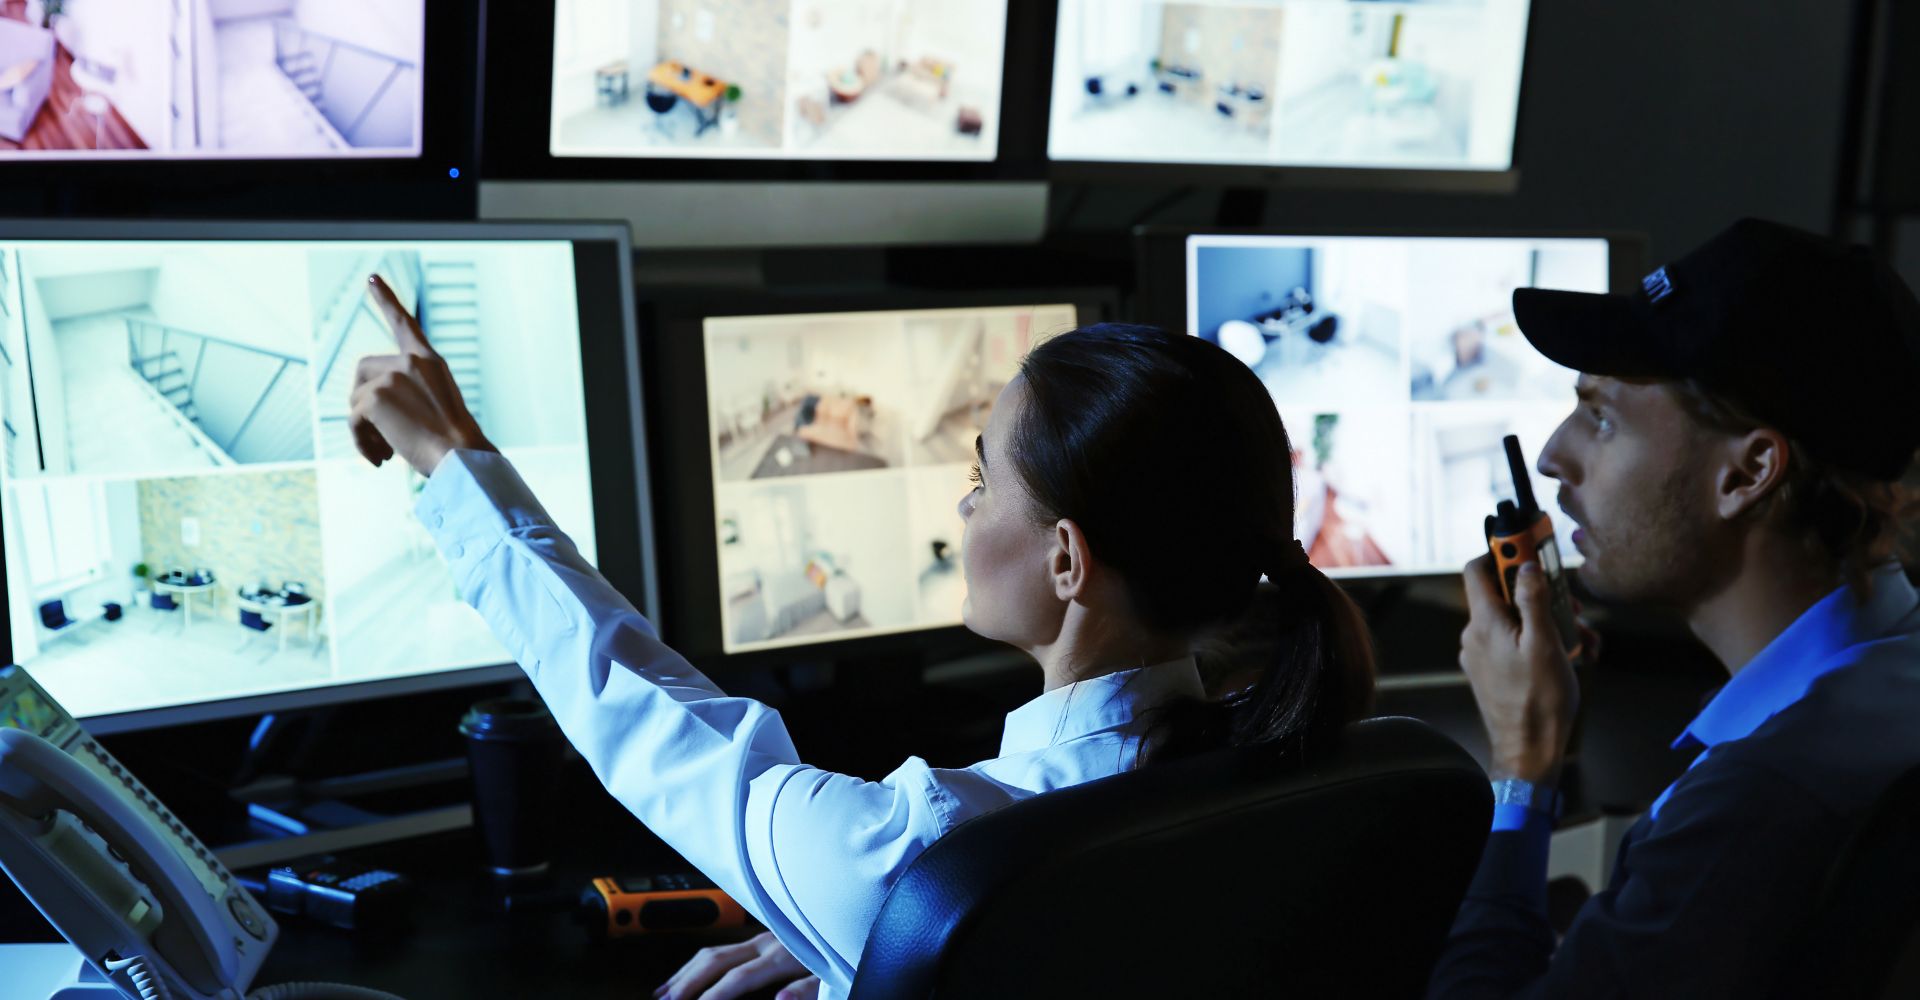 two people looking at security camera footage on multiple screens